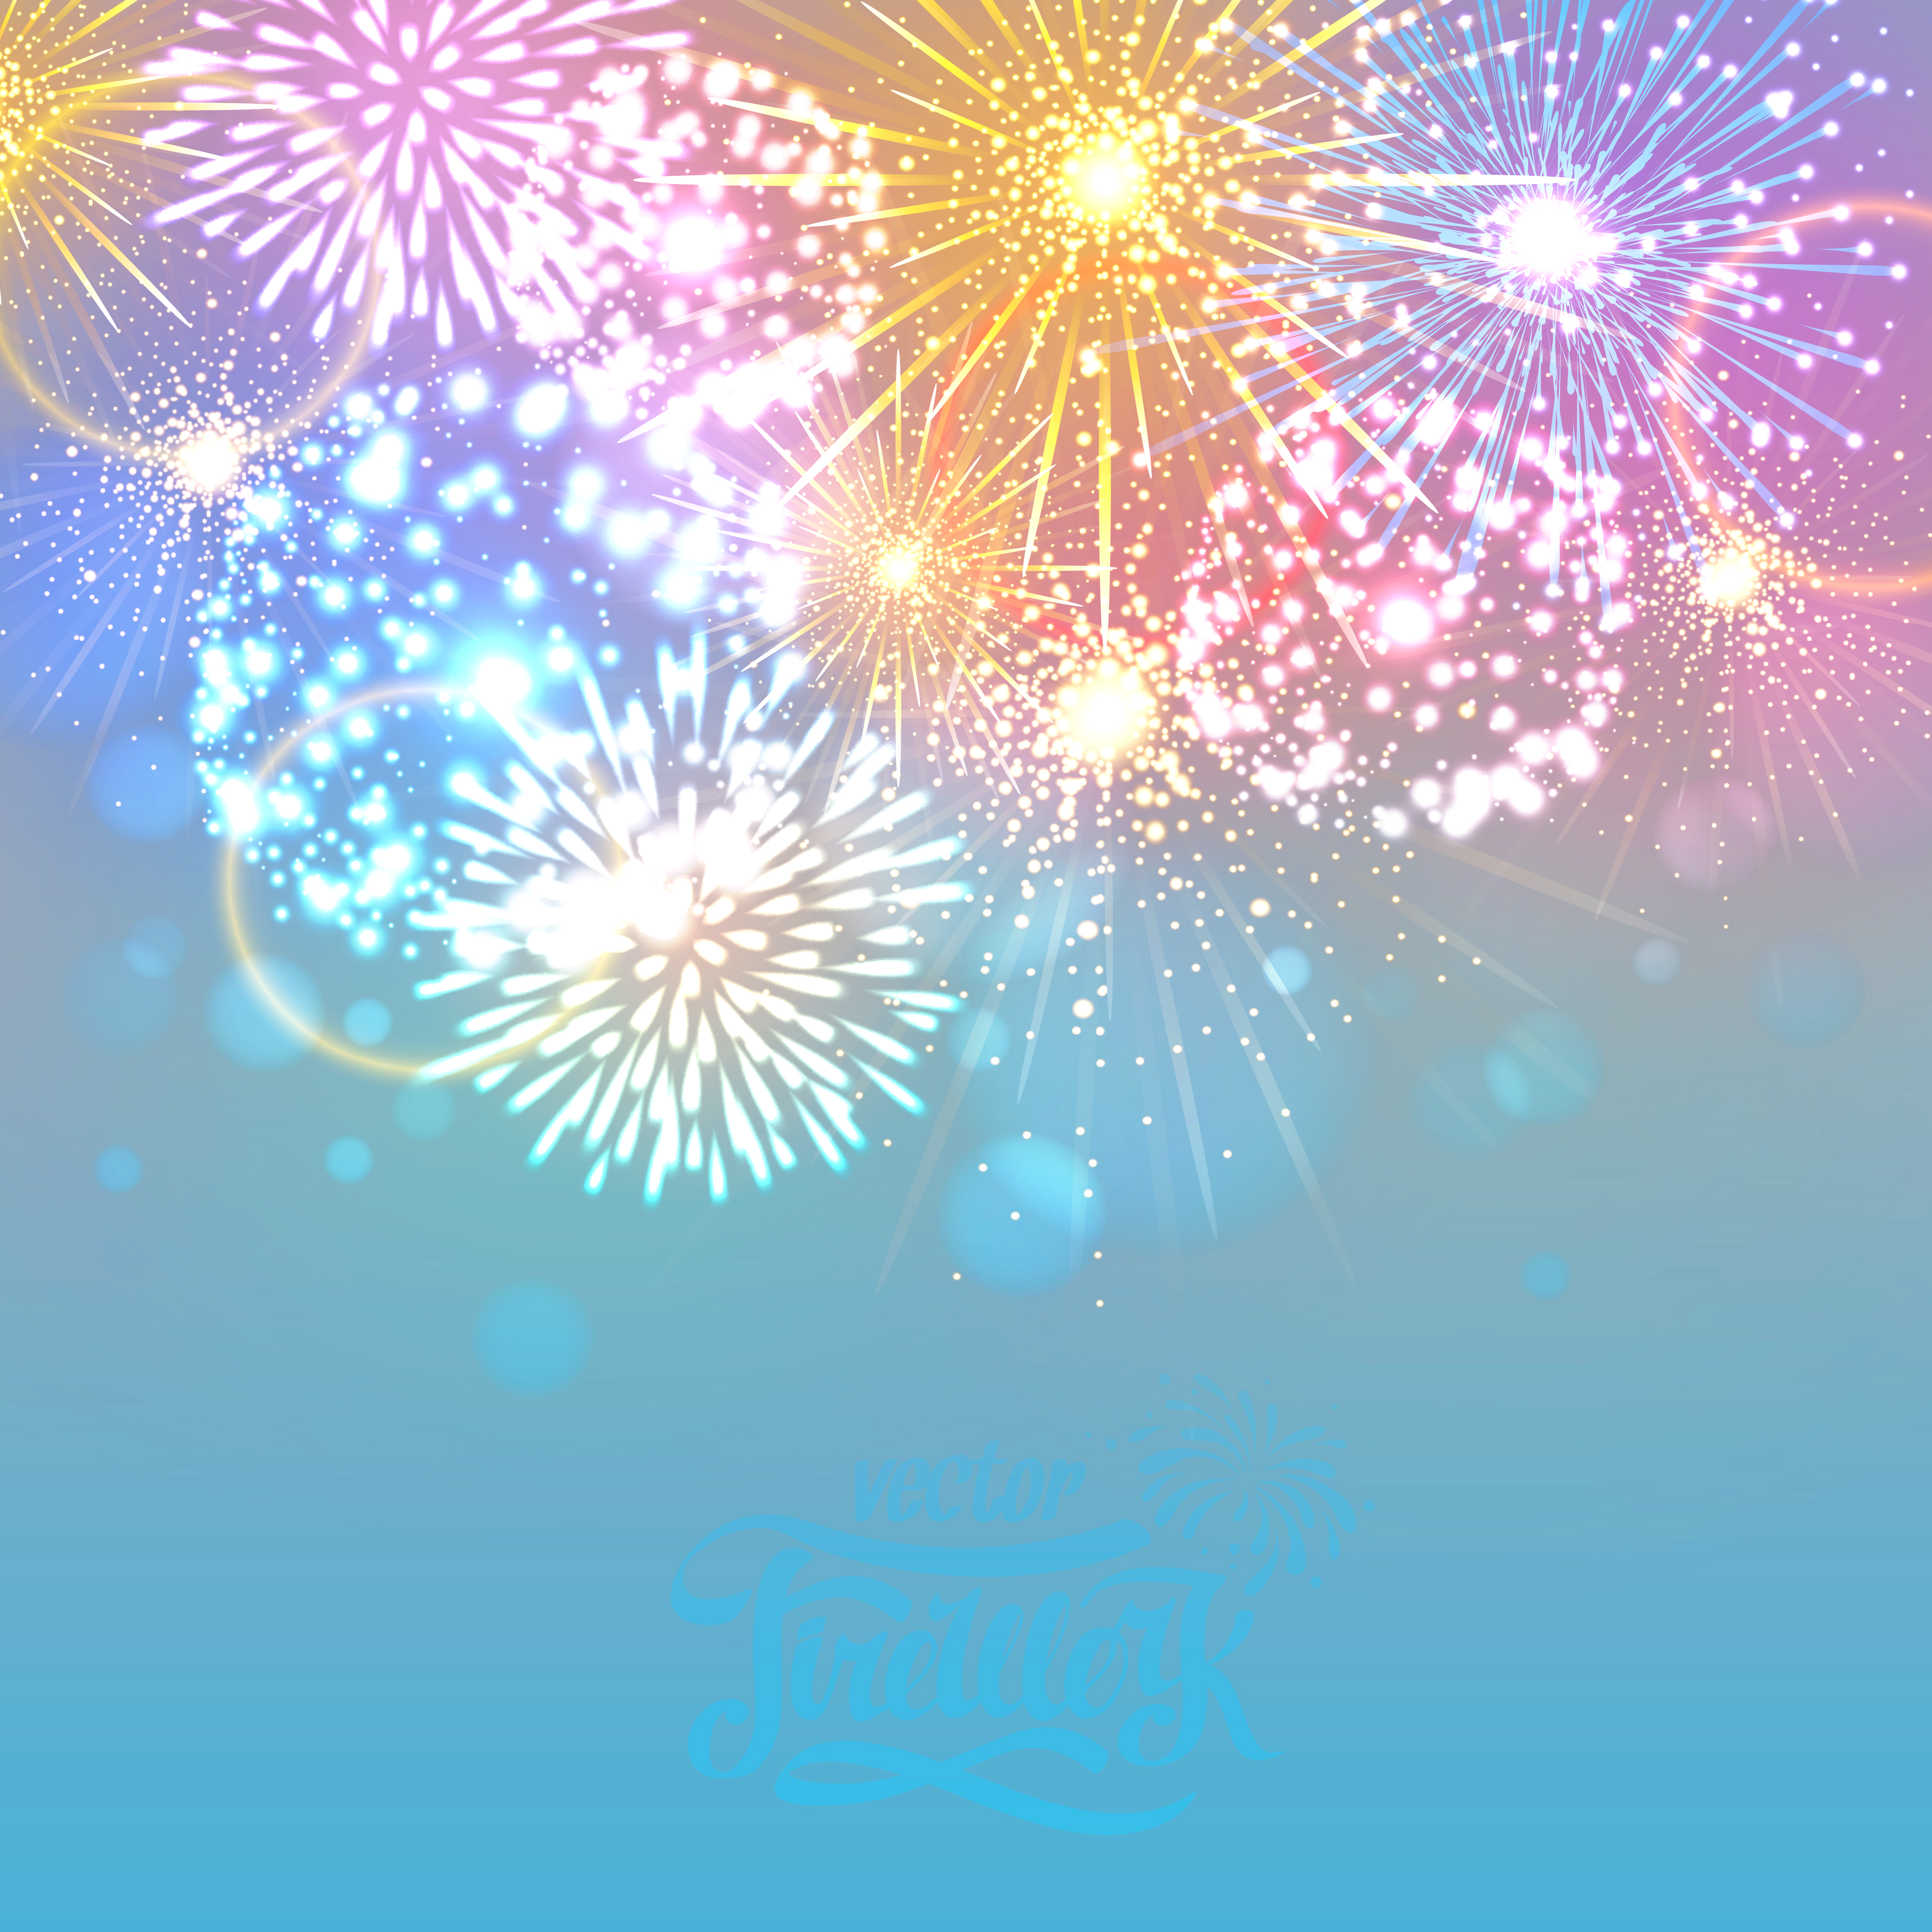 Stock Photography Illustration Beautiful Transprent Colorful Bright Fireworks